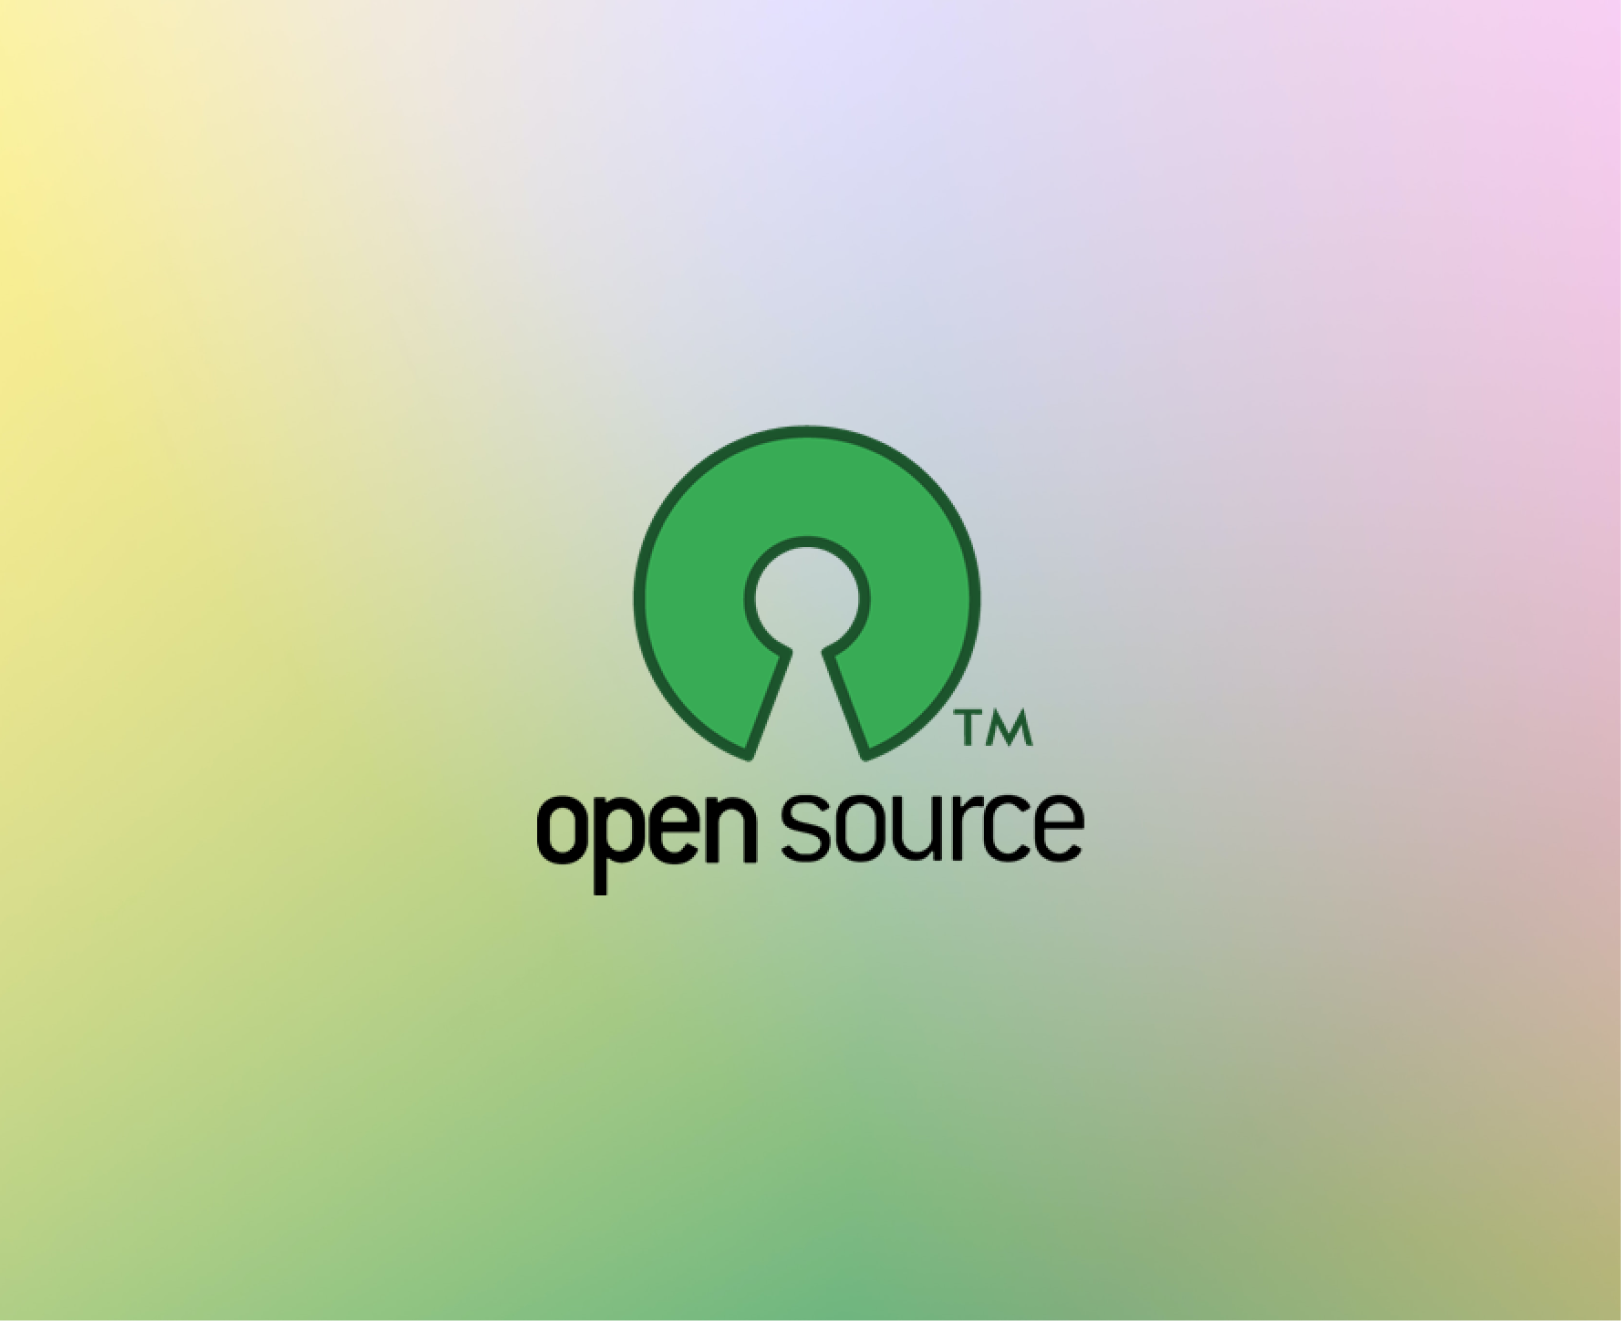 10 open source APM tools to consider in 2023